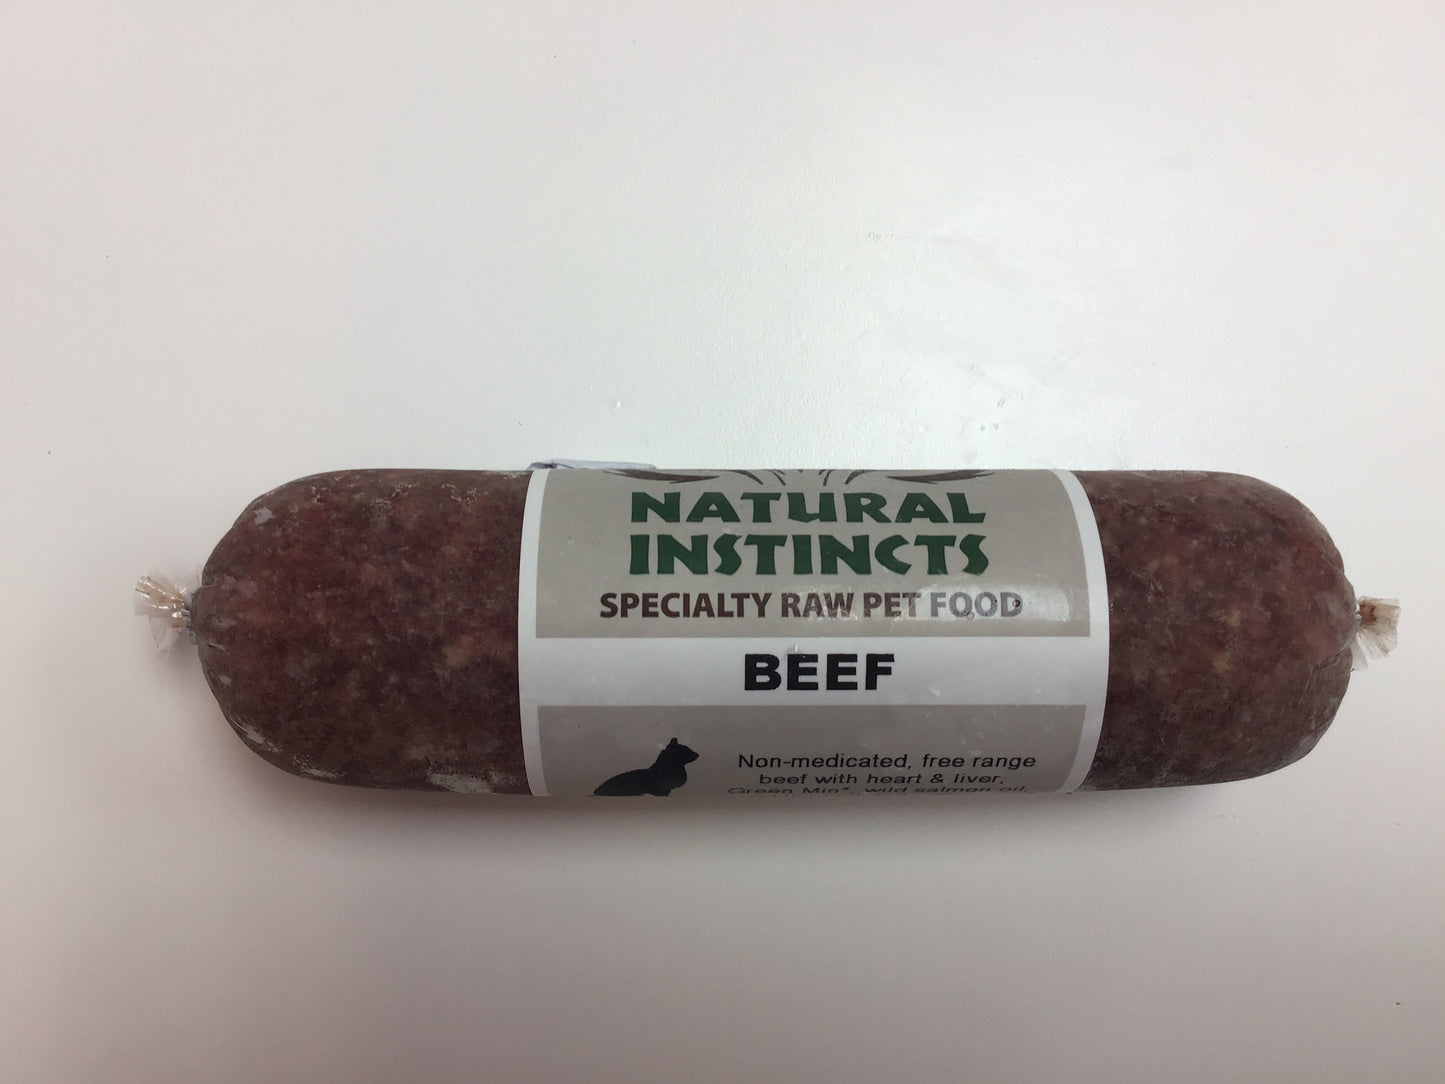 NATURAL INSTINCTS Raw Beef Non-Medicated, 250g